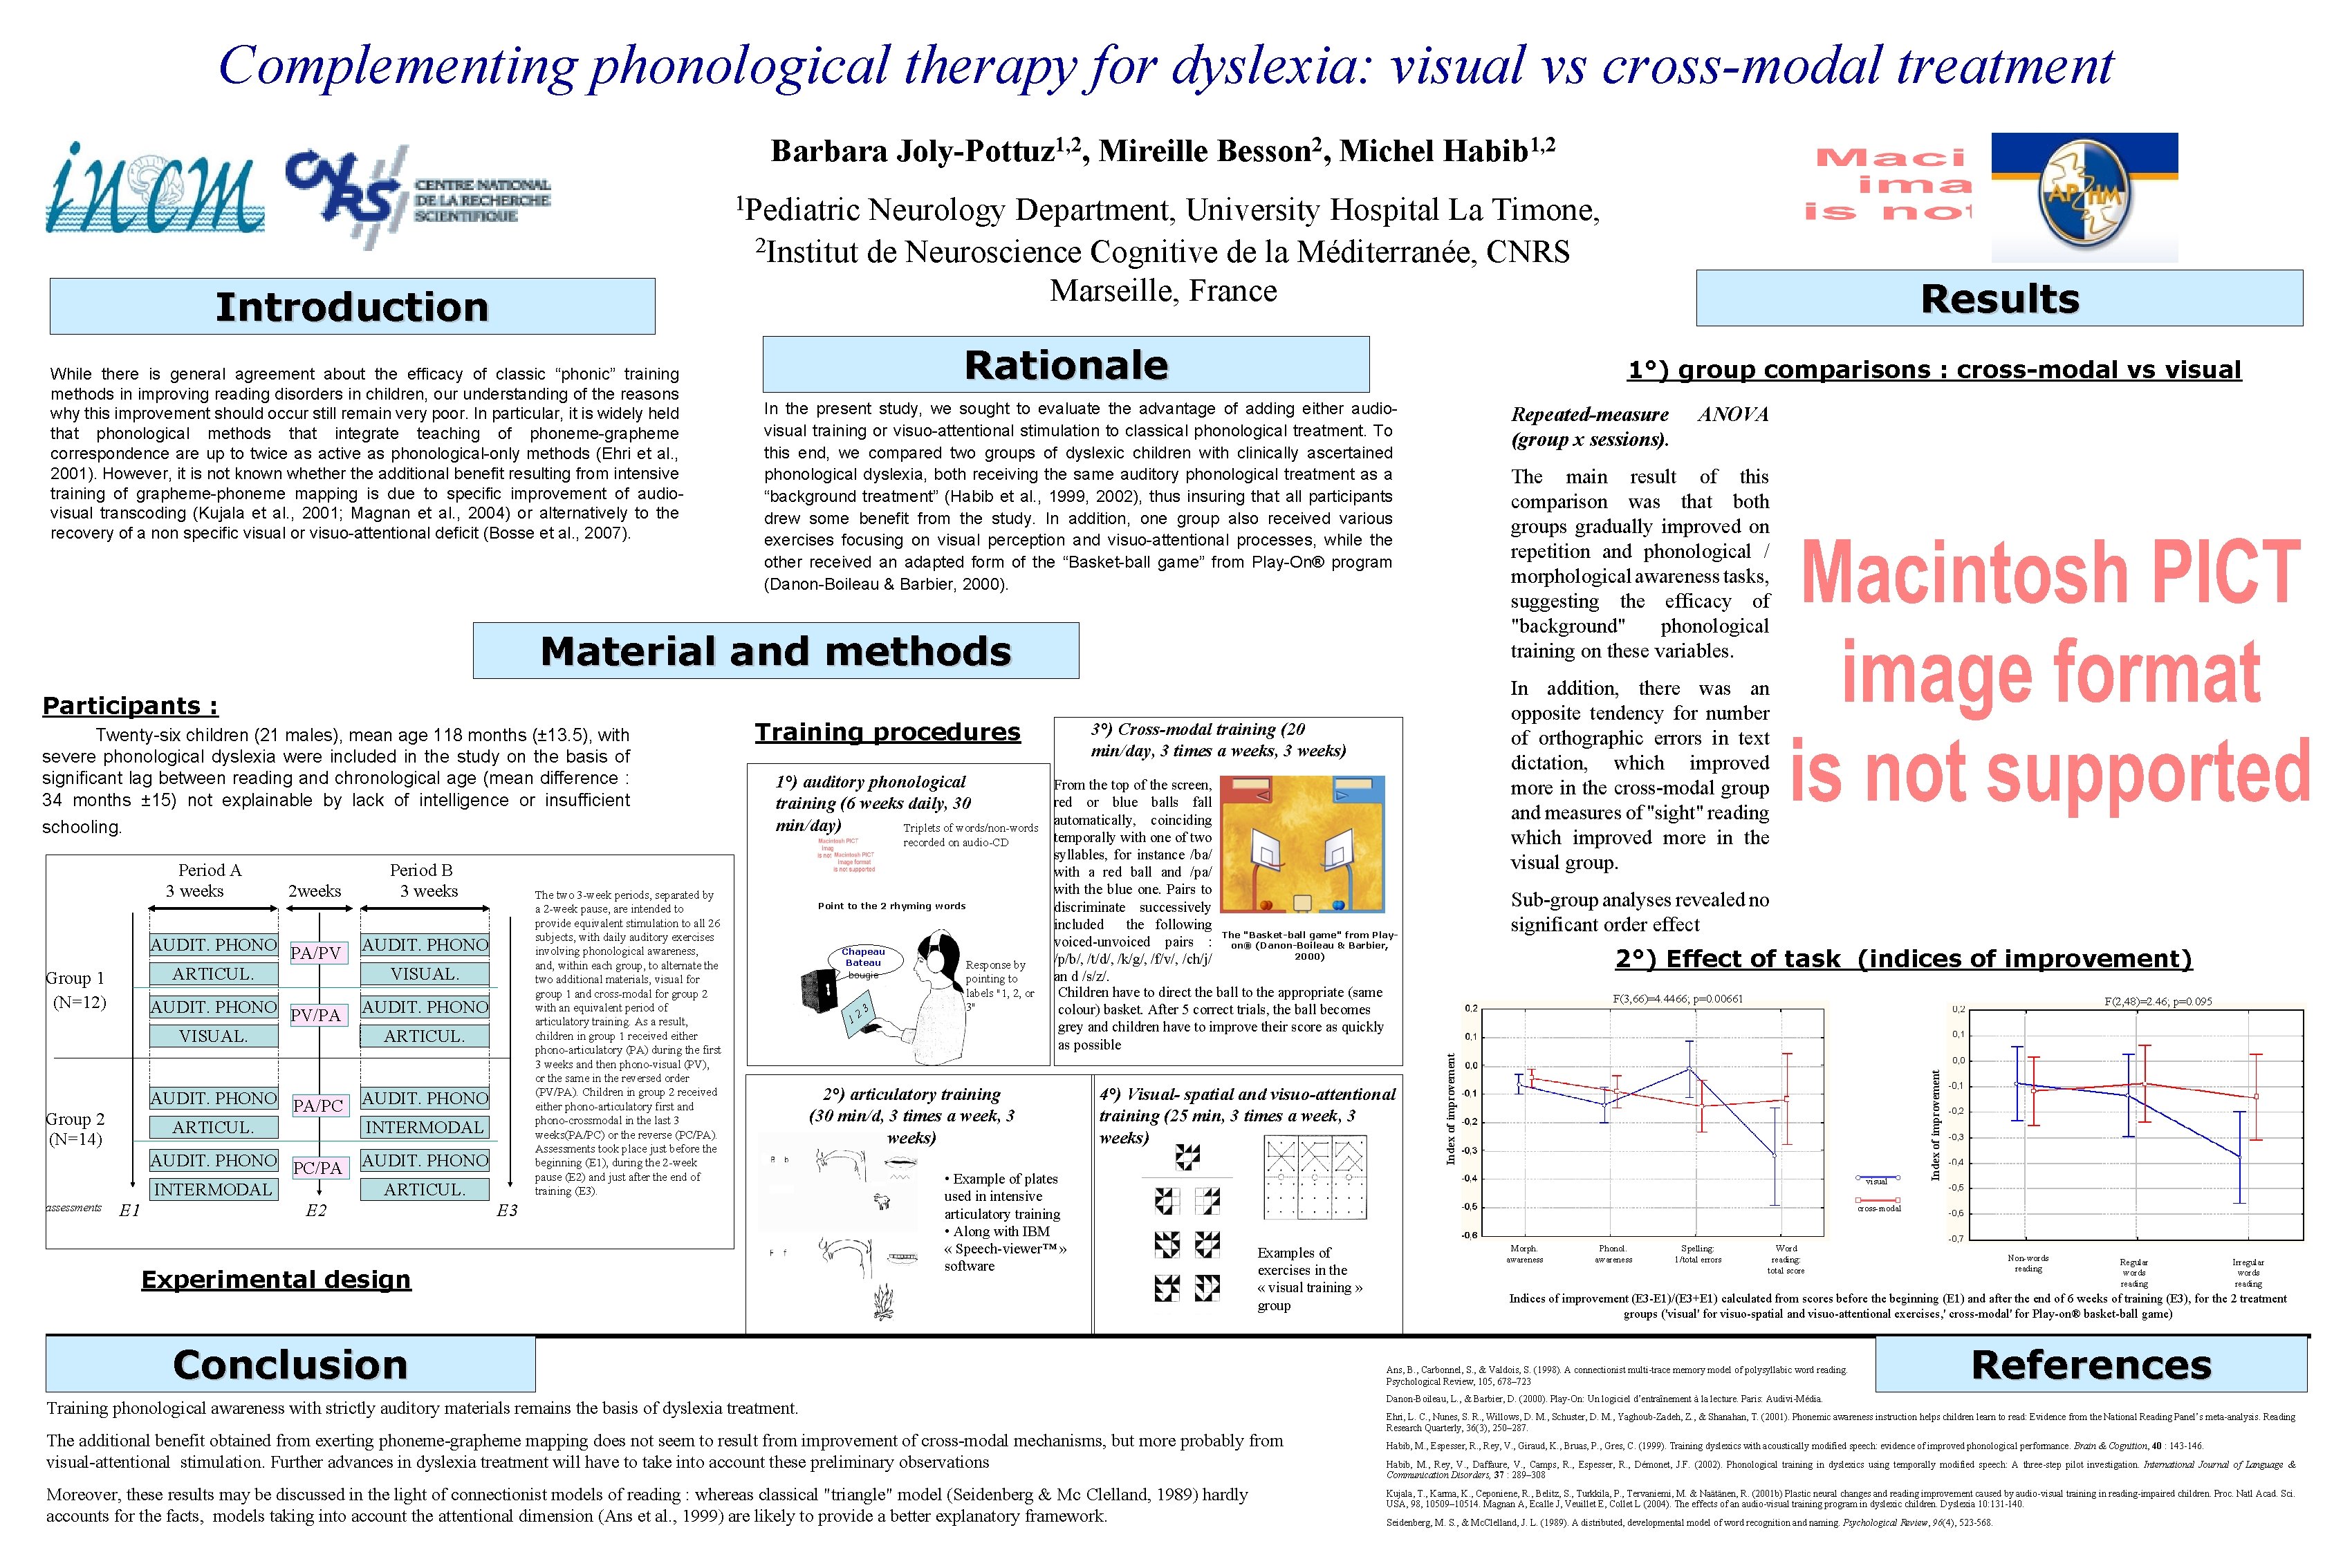 Complementing phonological therapy for dyslexia: visual vs cross-modal treatment Barbara 1, 2 Joly-Pottuz ,